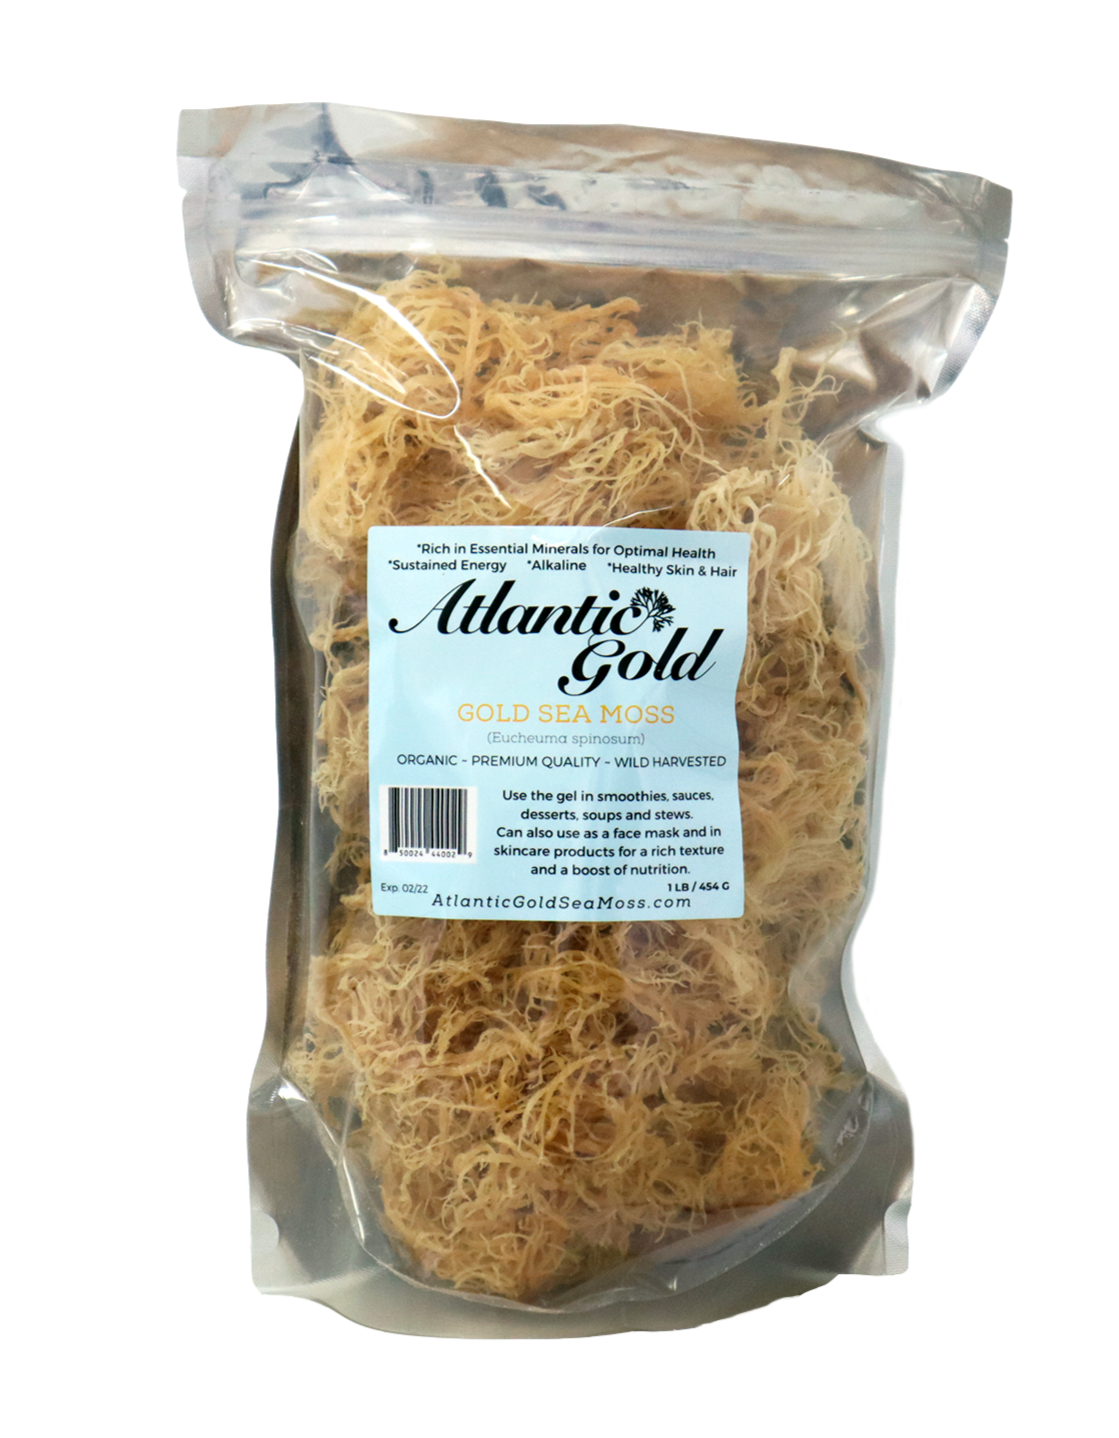 Palm Oil Flakes Sustainable Palm 16 Oz. / 1 LB Soap Making Supplies In  Stand-Up Barrier Pouch All Natural. 